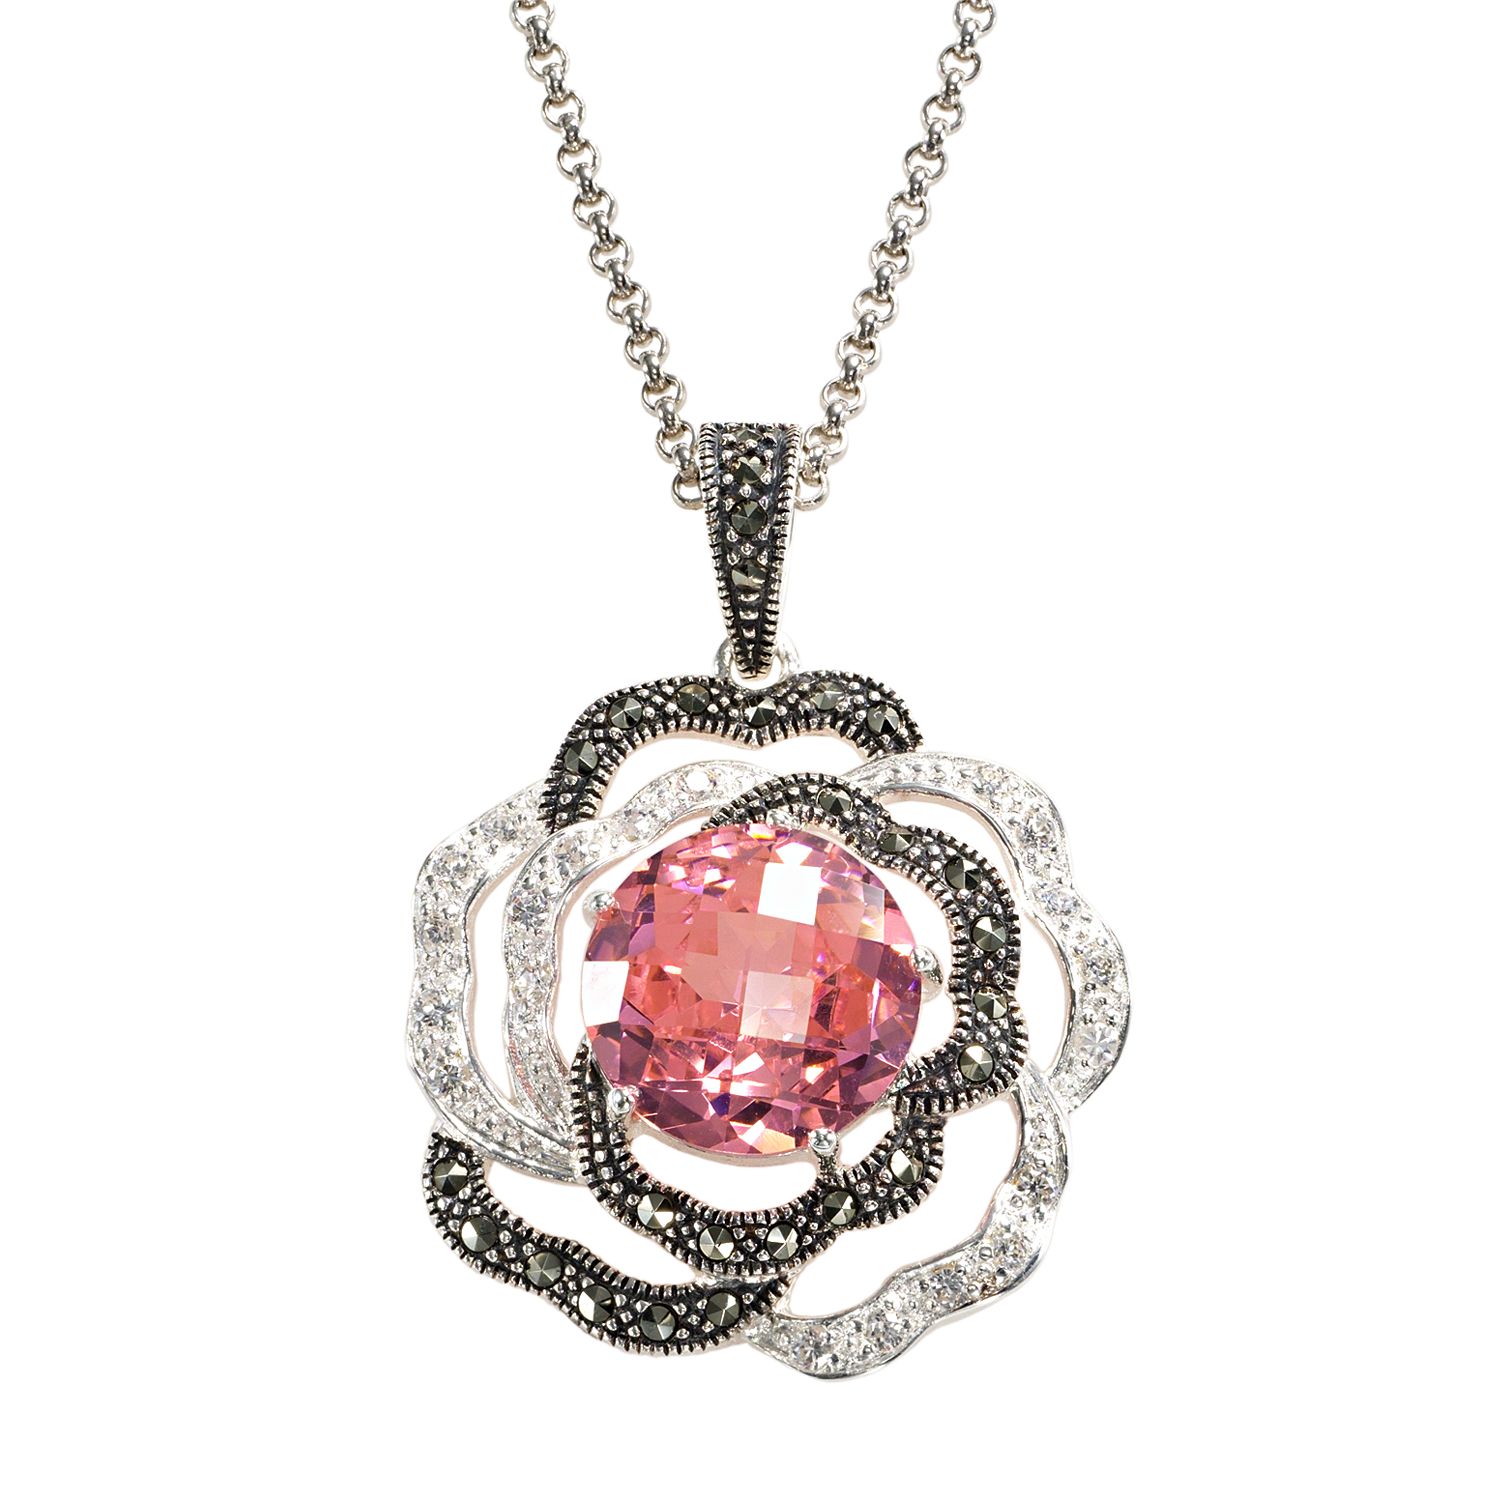 Image for Lavish by TJM Sterling Silver Cubic Zirconia Flower Pendant Necklace at Kohl's.